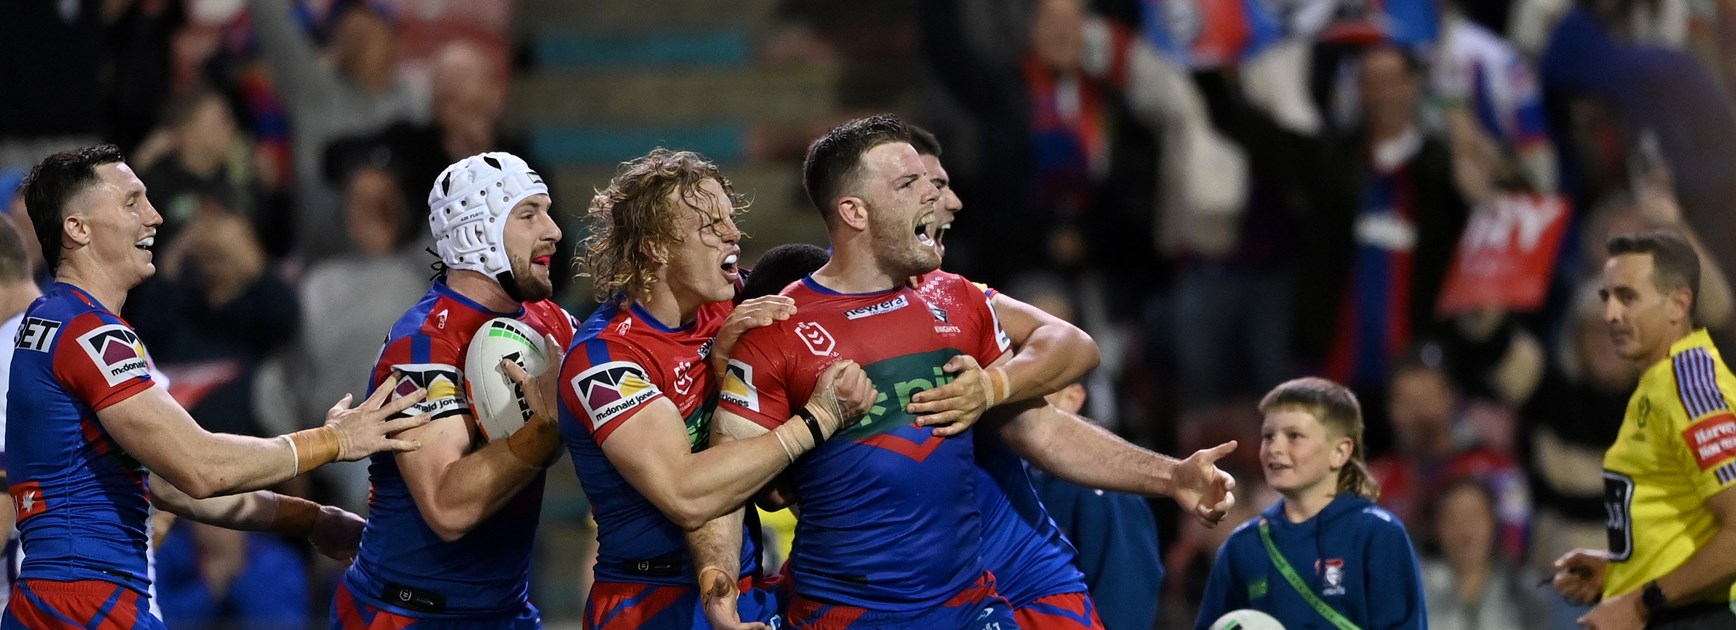 New beginnings: Fitzgibbon eager to leave on a high note